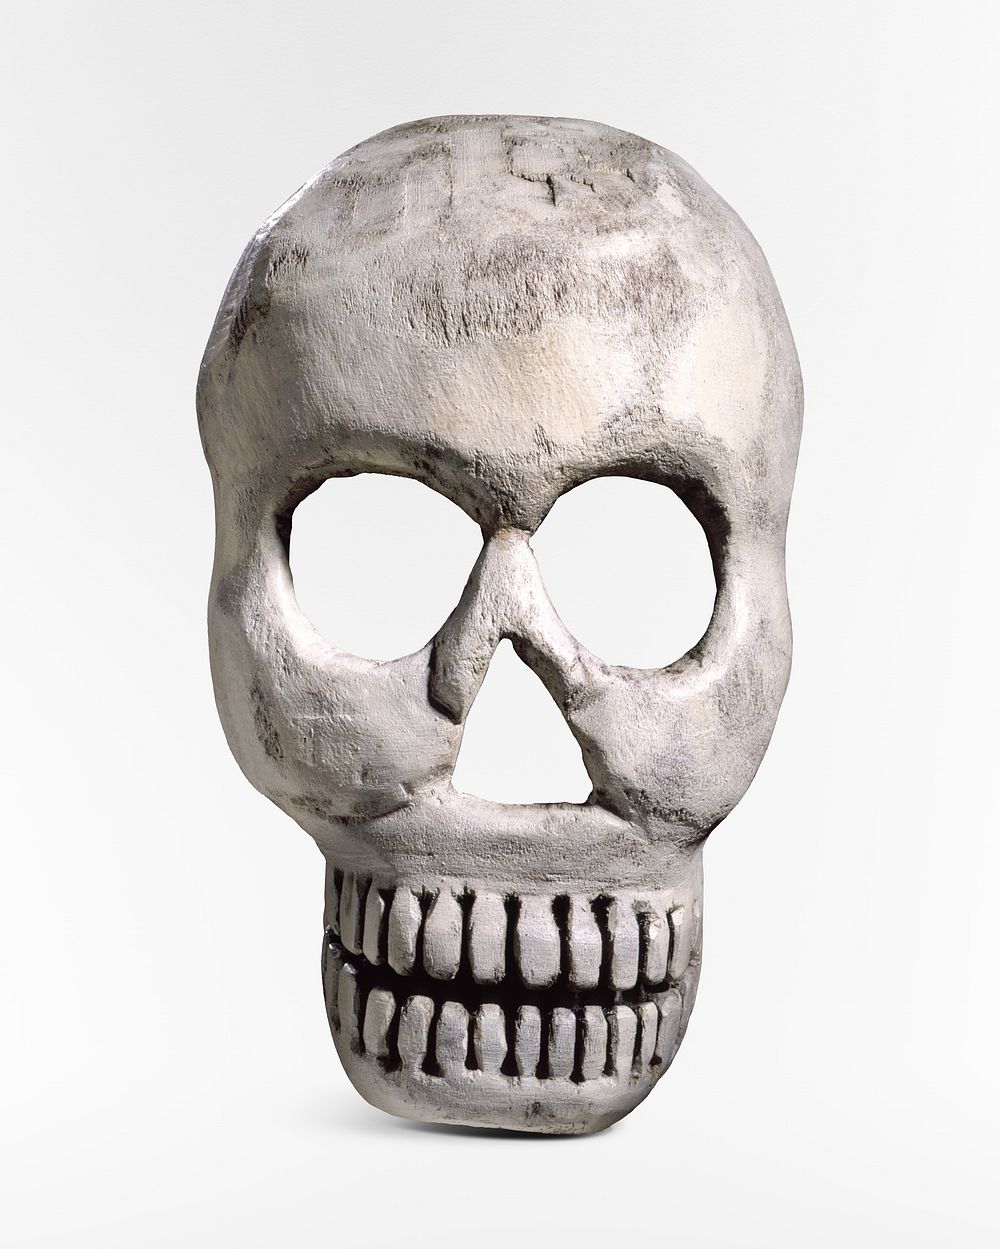 Skull (20th century). Original public domain image from The Smithsonian Institution. Digitally enhanced by rawpixel.